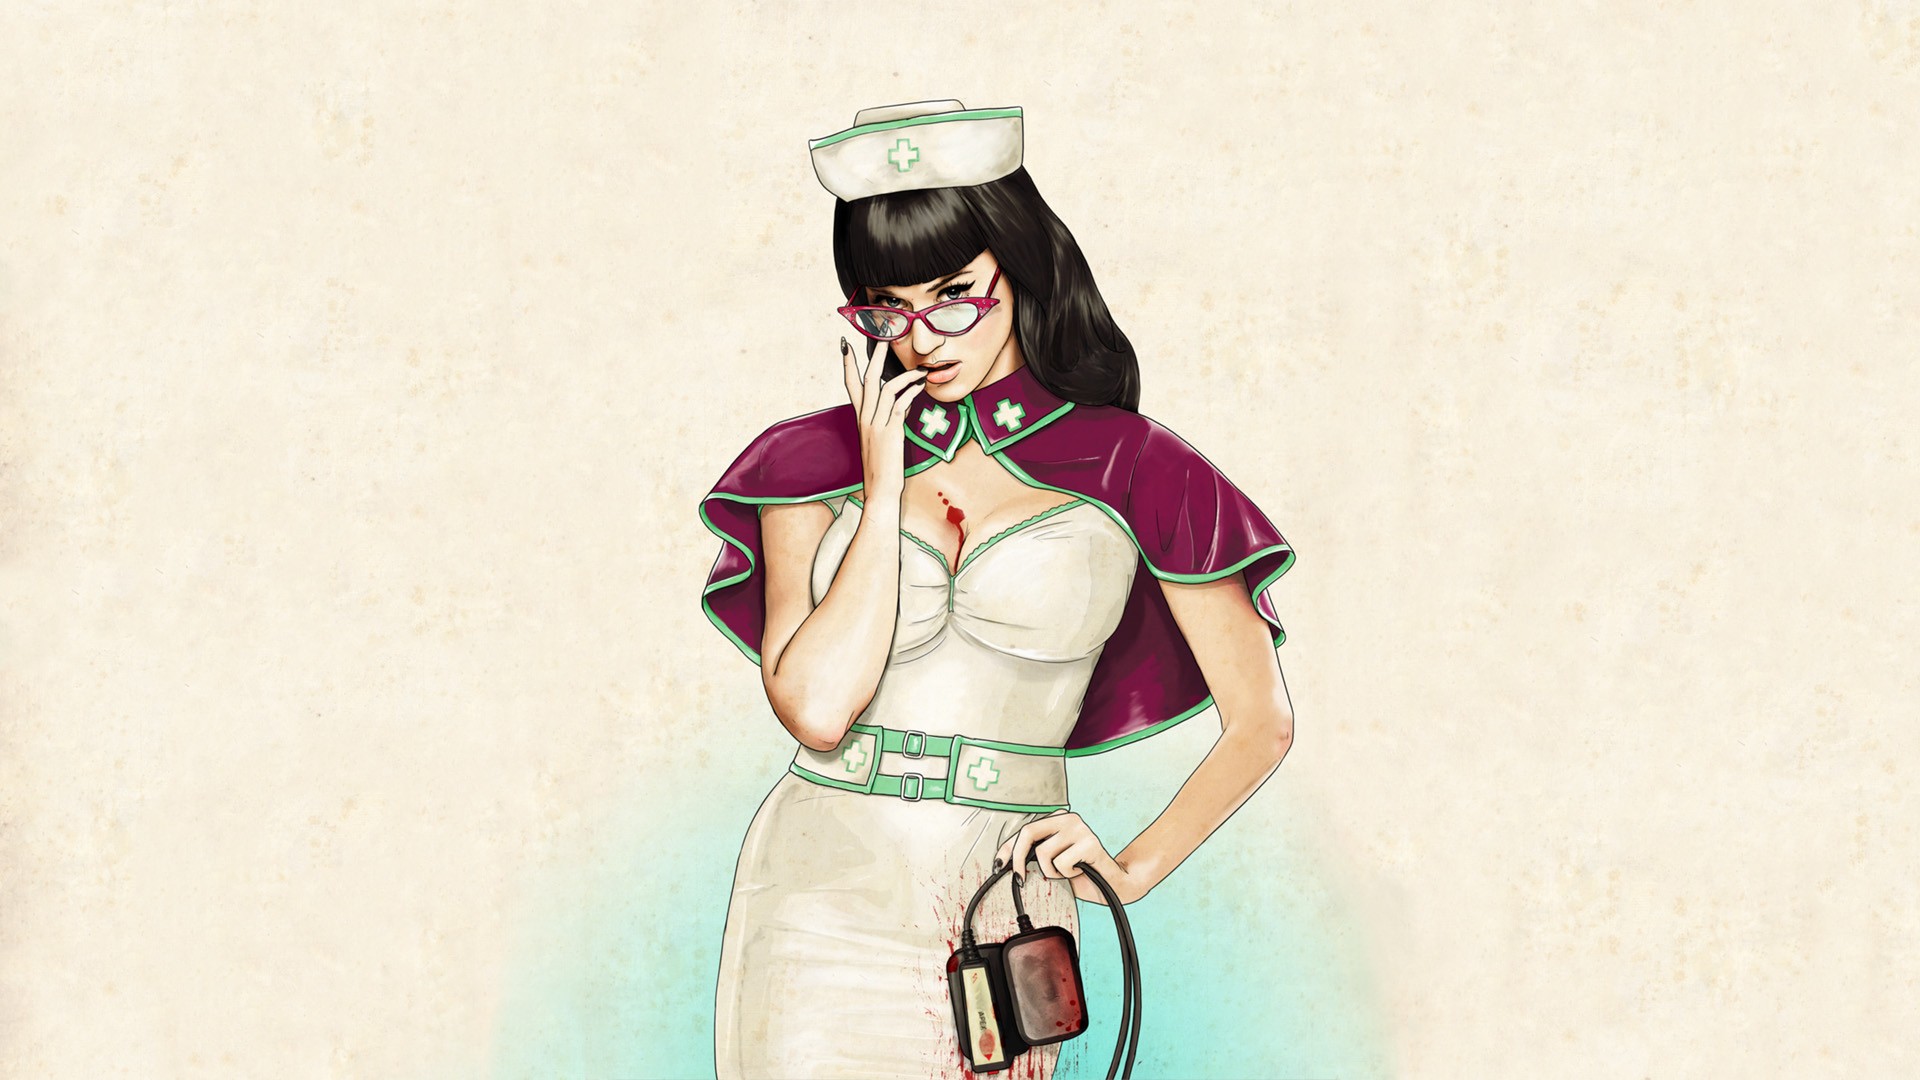 General 1920x1080 Slaughterhouse Starlets Keith P. Rein Katy Perry blood boobs cleavage nurse outfit hat dark hair glasses women with glasses women simple background painted nails artwork singer American women